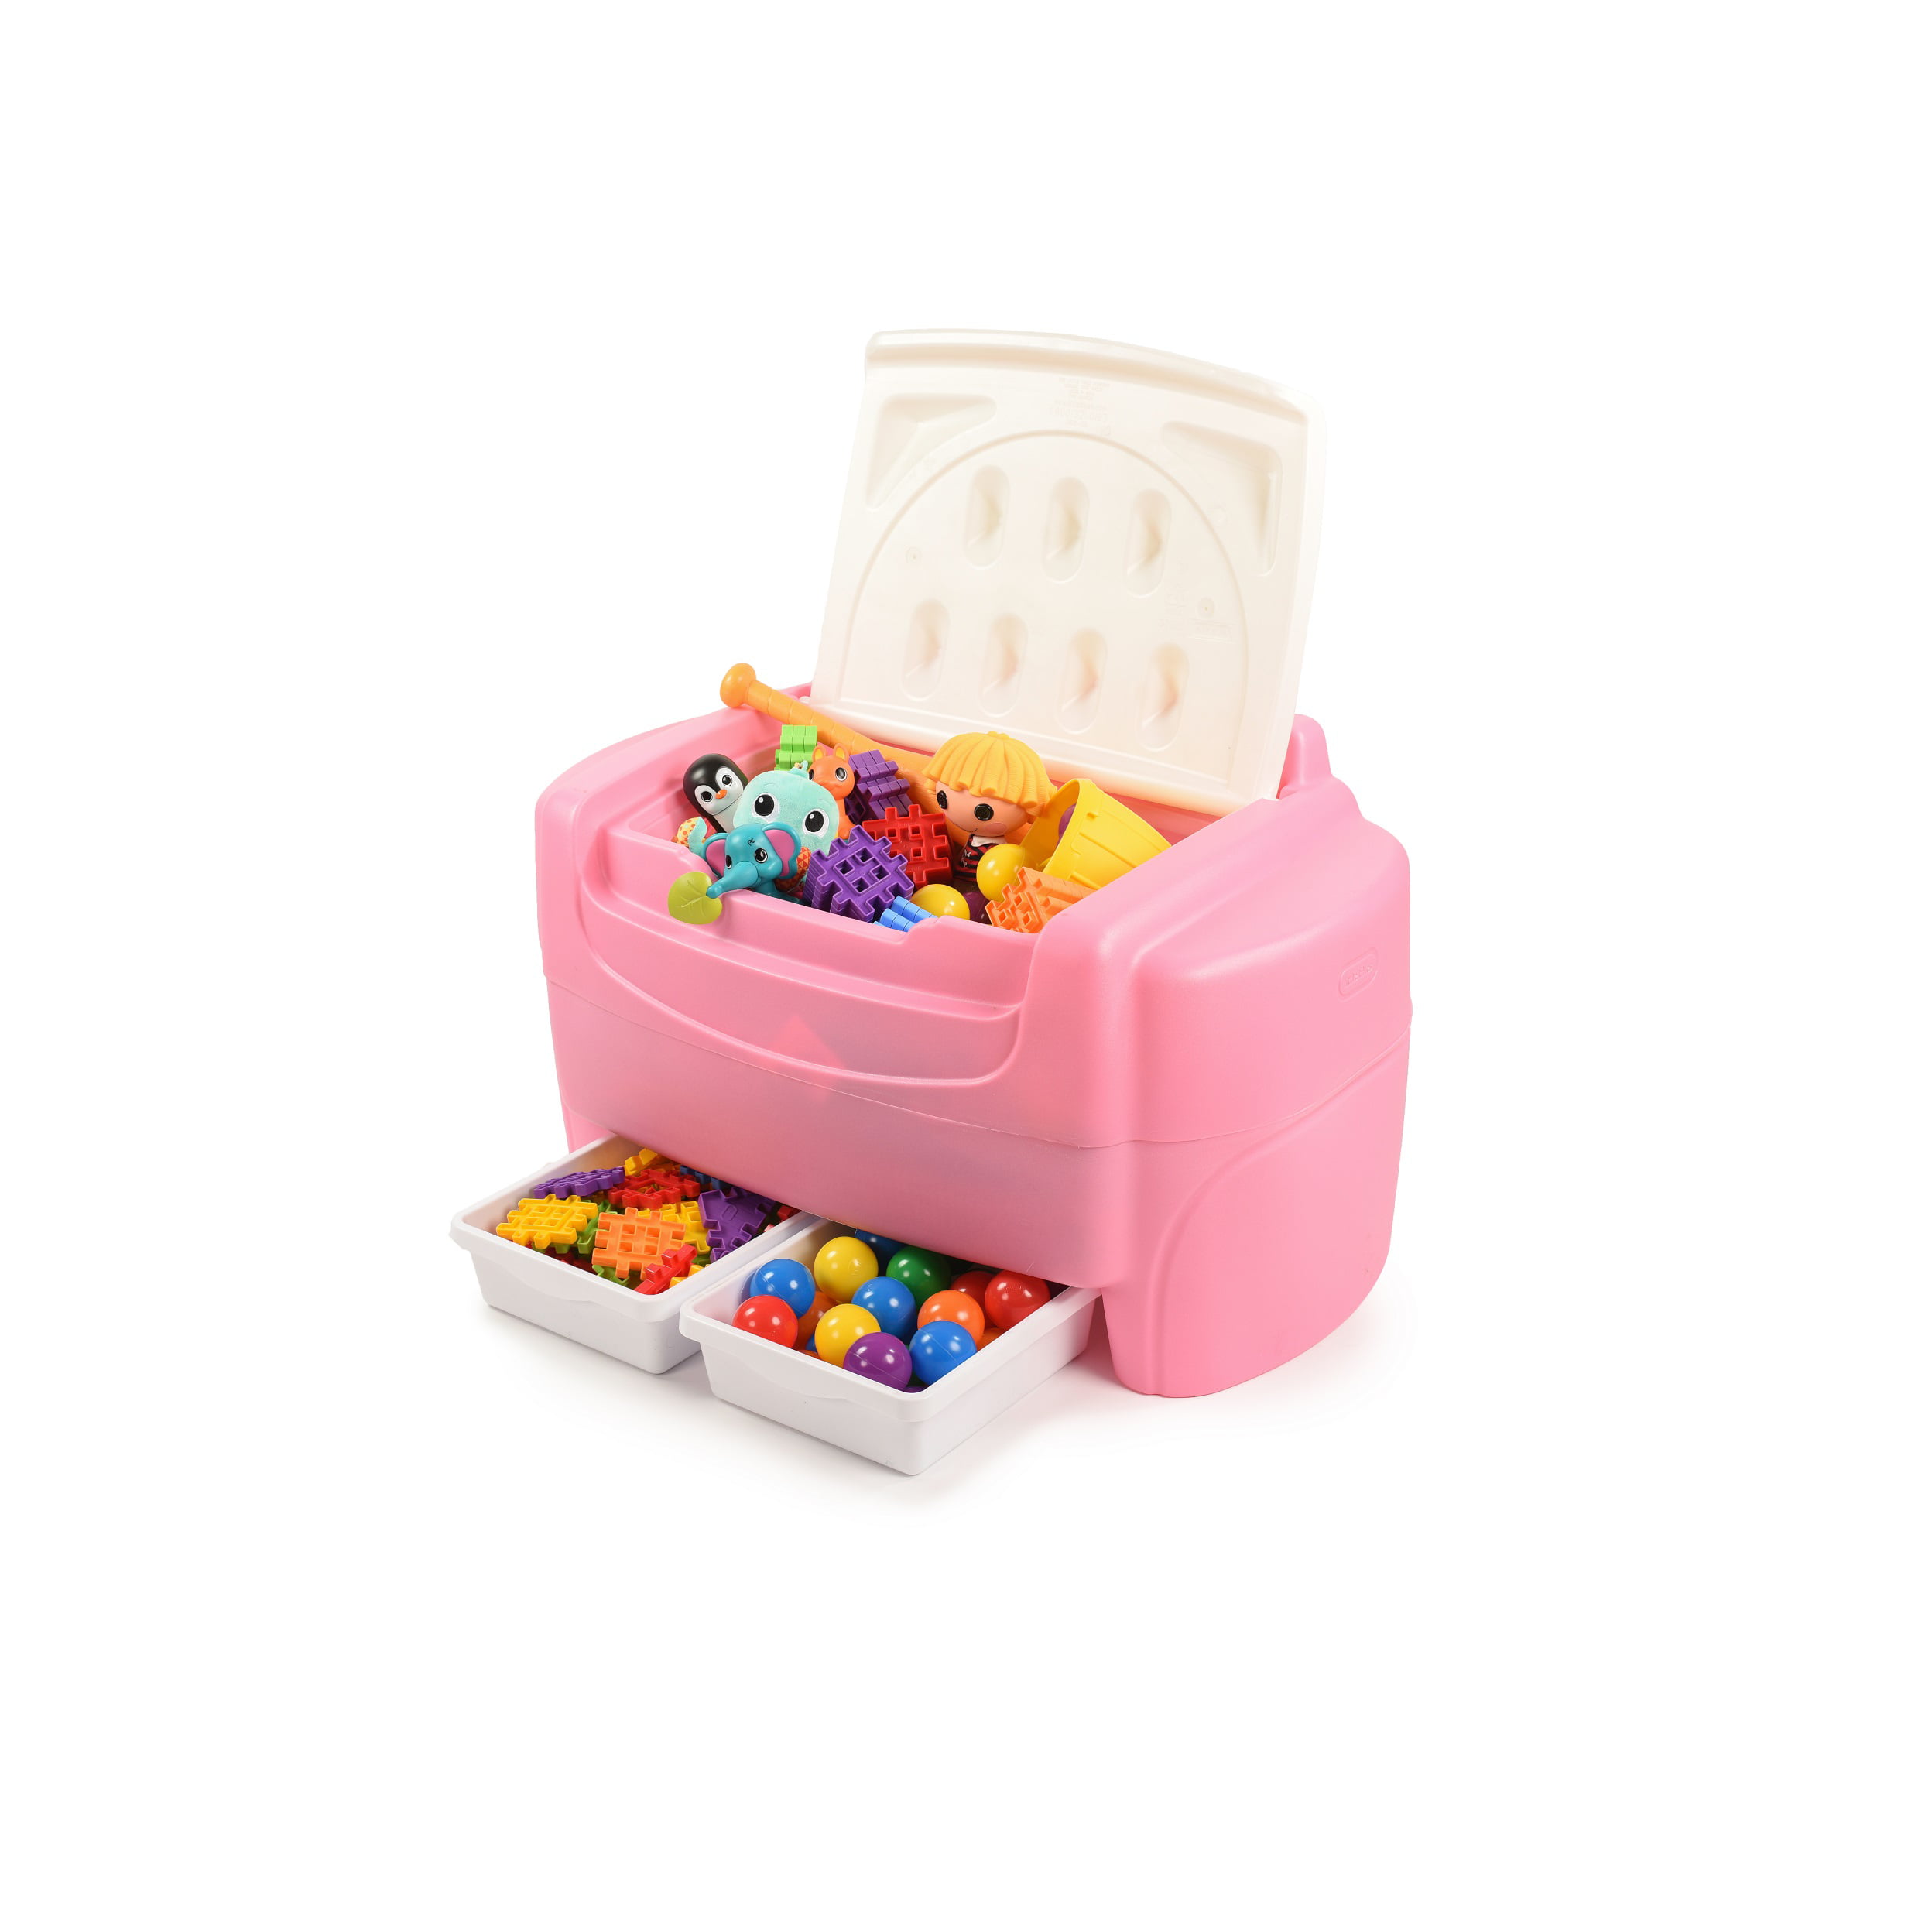 Little Tikes Sort N Store Toy Storage Chest Pink And White